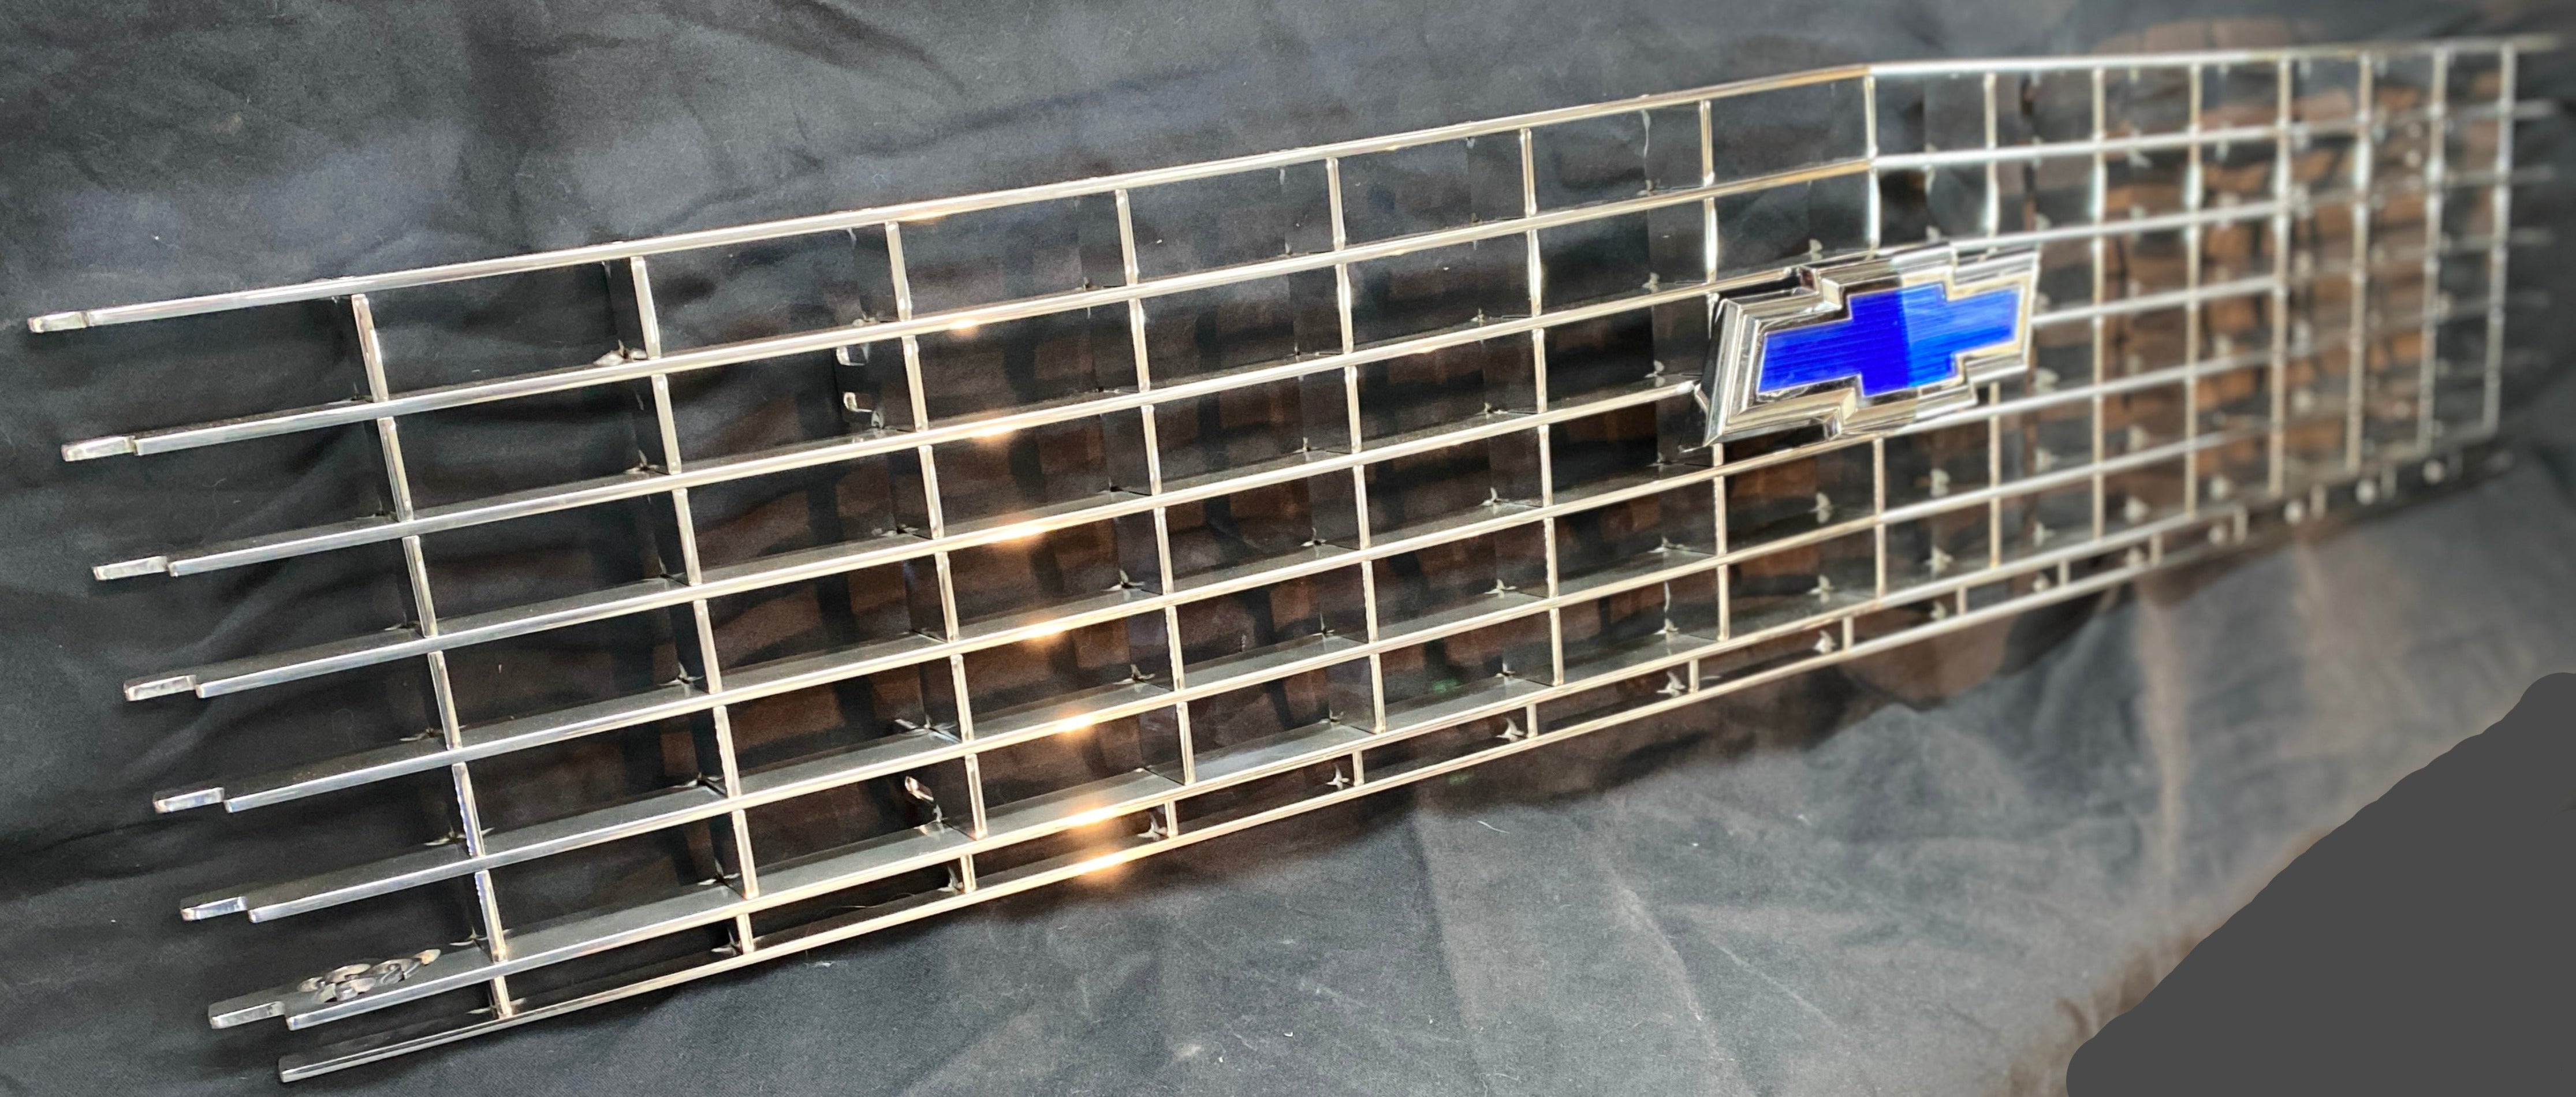 Grille AF (Aluminum Fabricated) 1971-72 Chevrolet Truck | Engineered Vintage | Custom Grilles for Classic Trucks